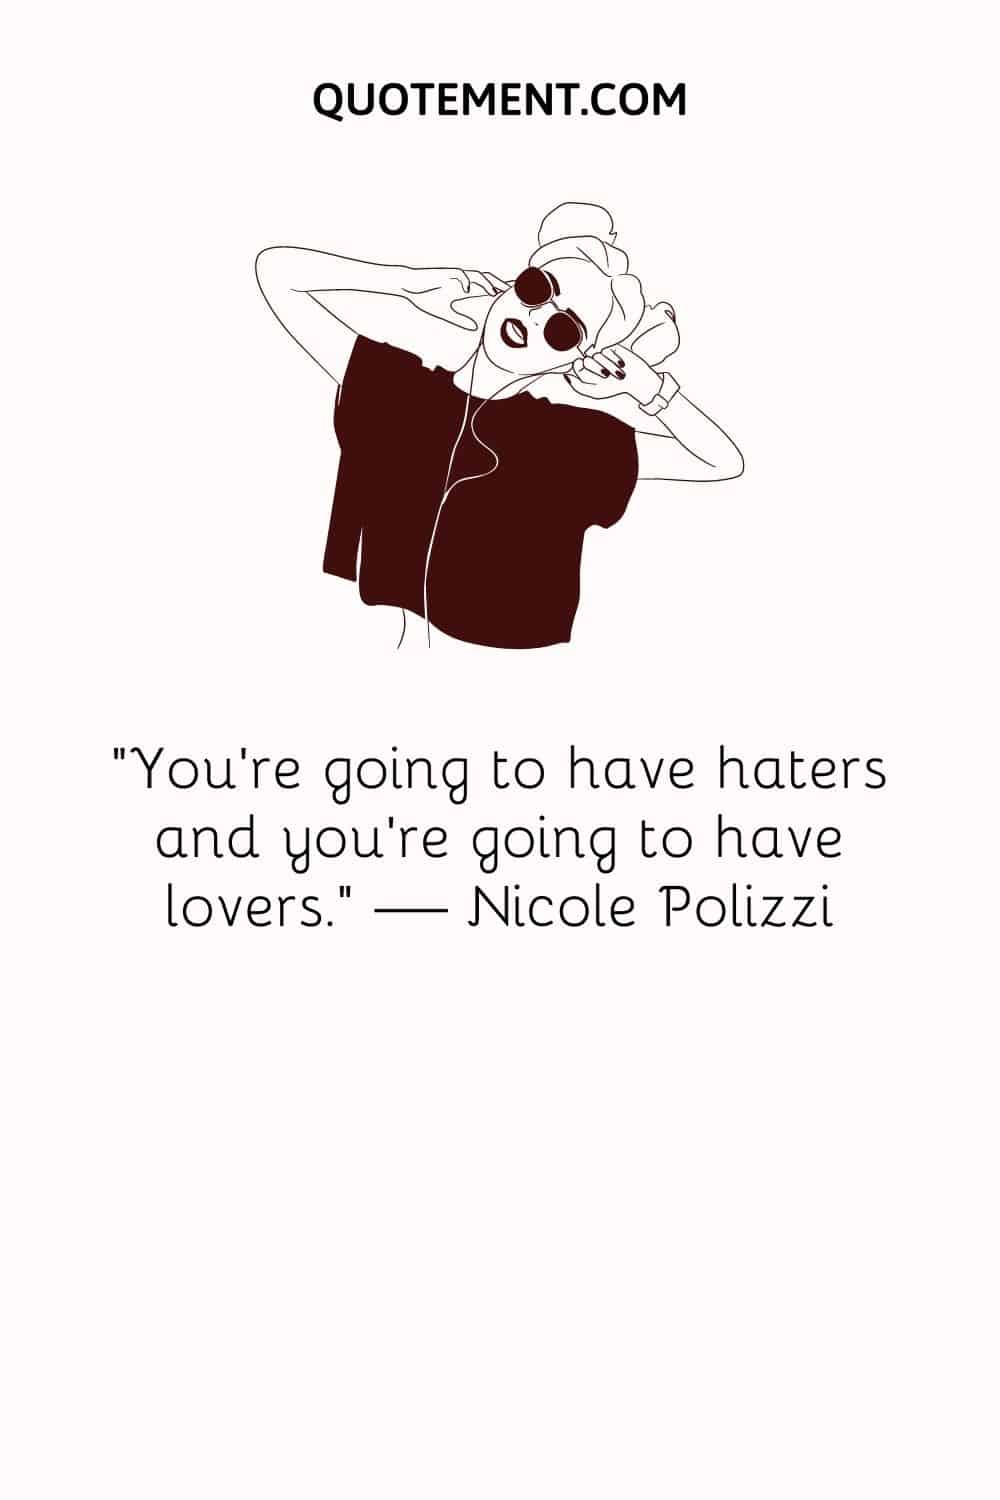 “You’re going to have haters and you’re going to have lovers.” — Nicole Polizzi